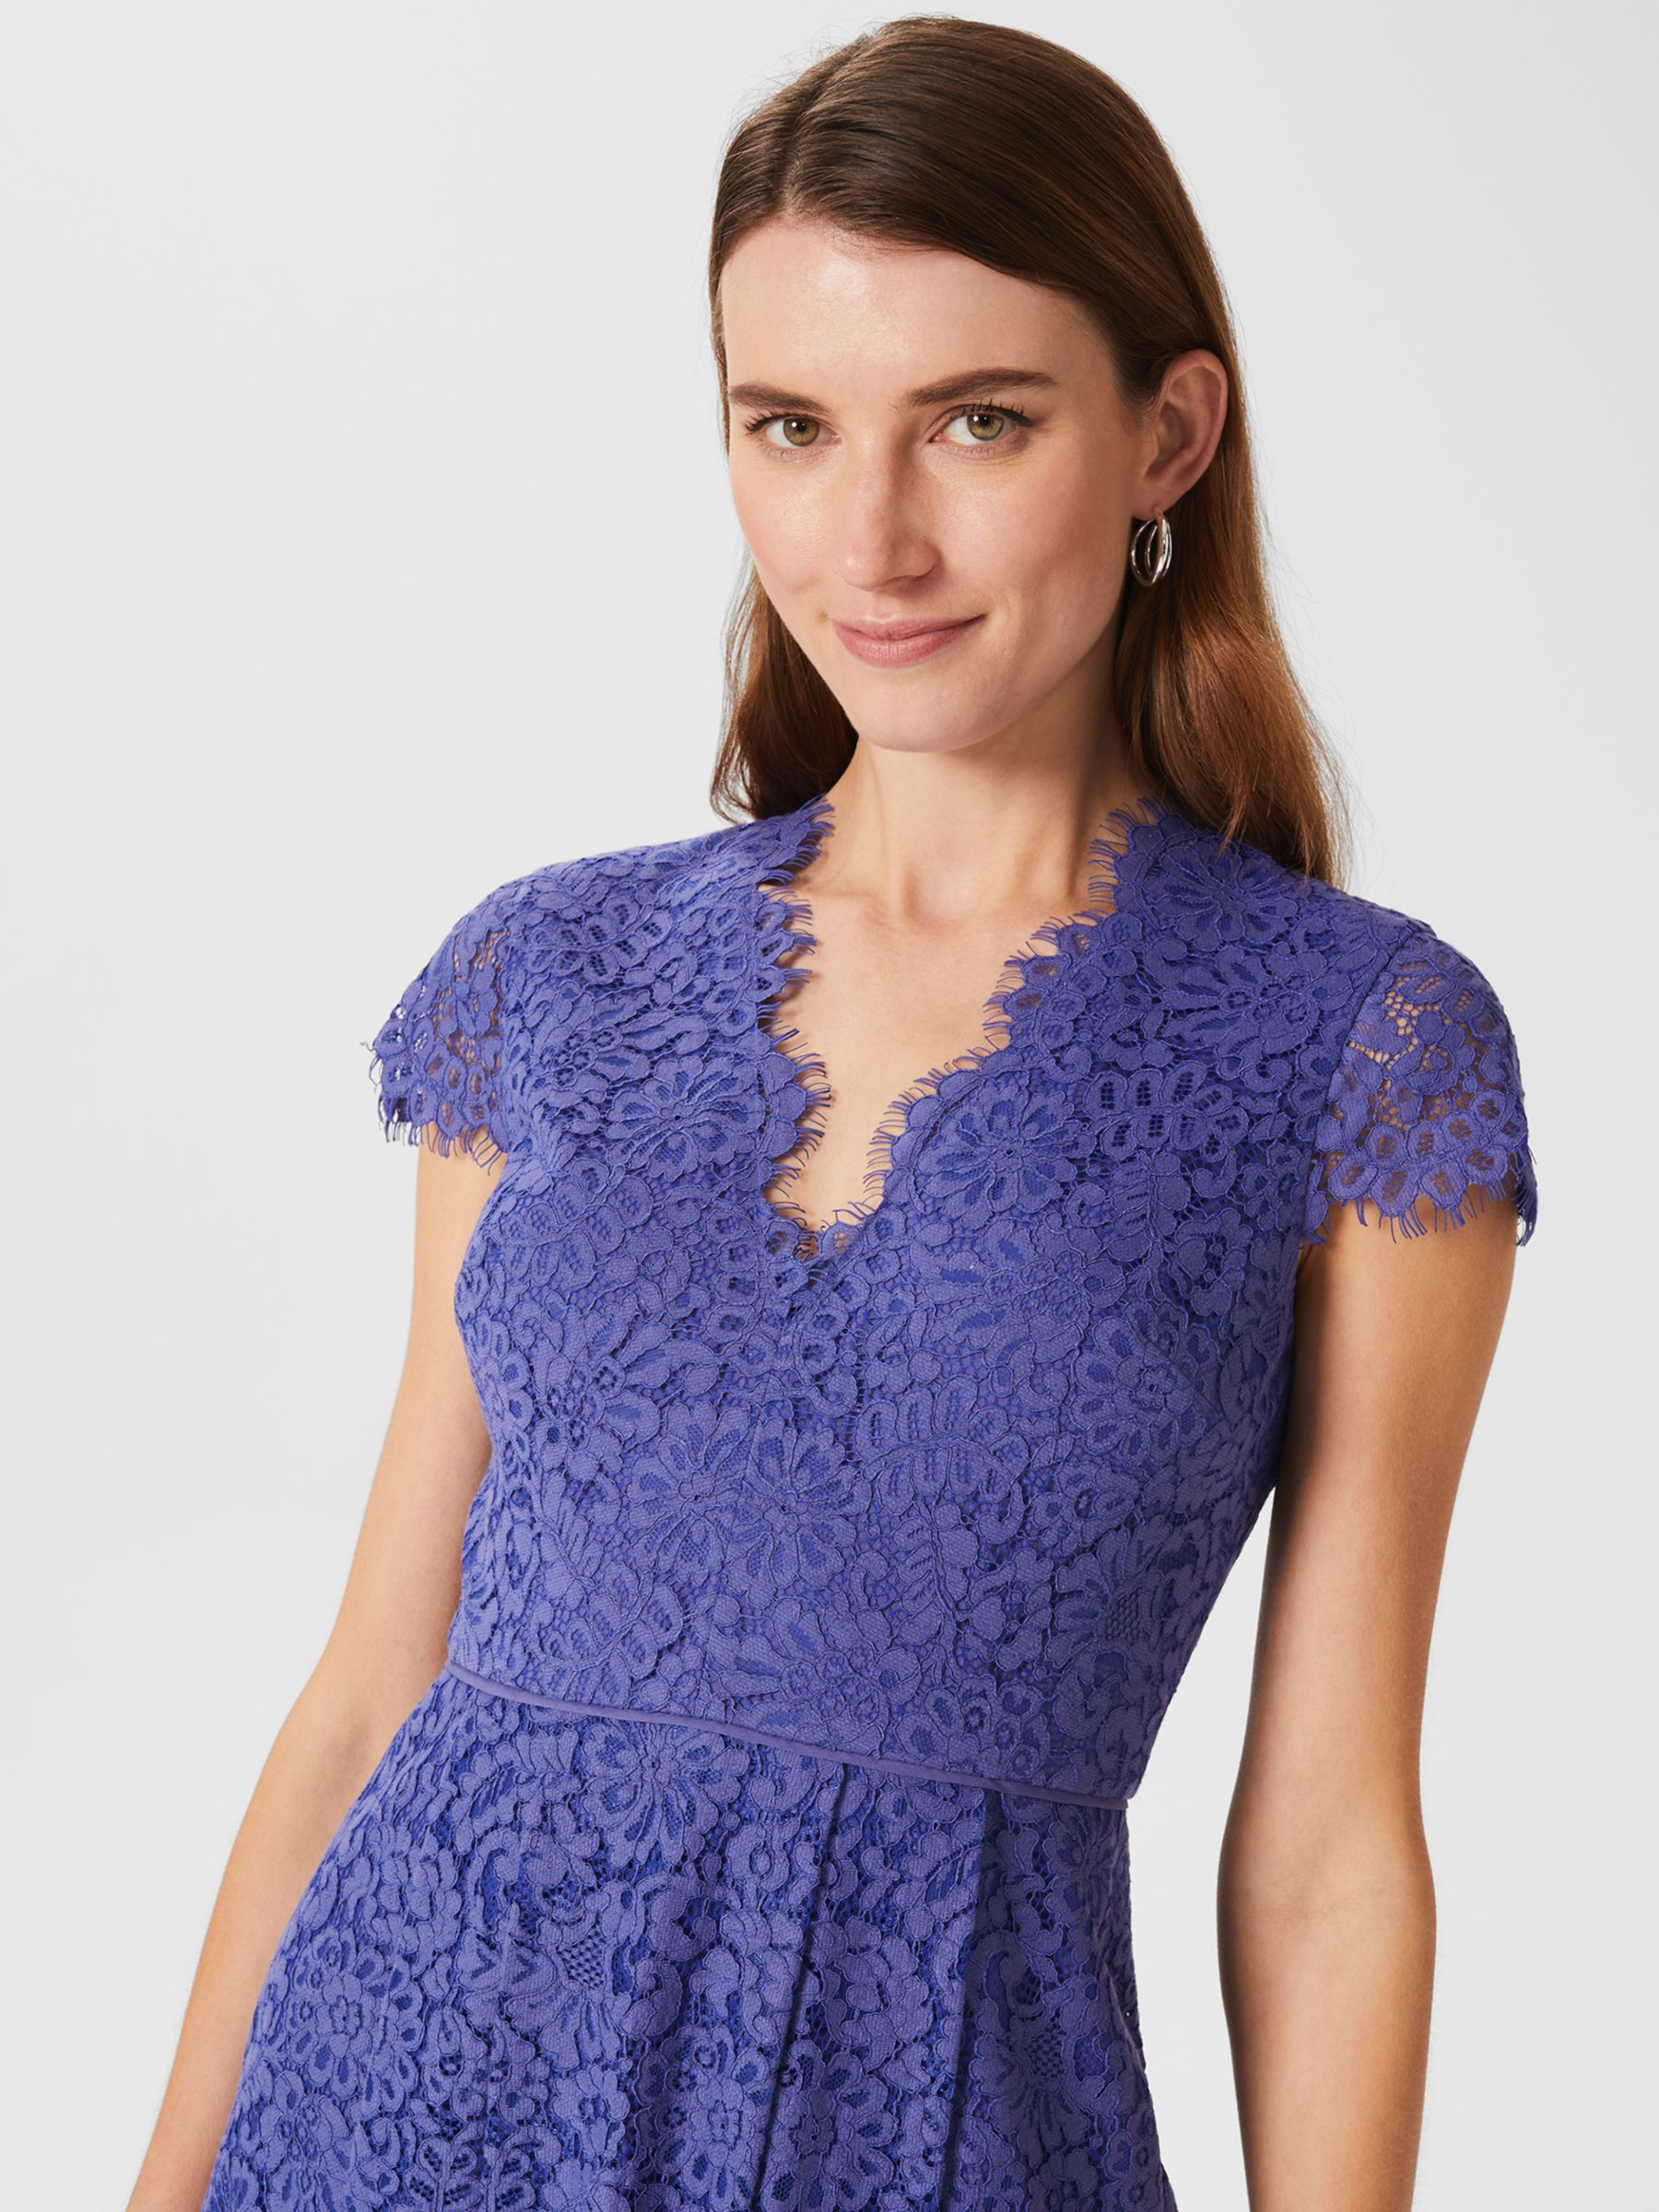 Hobbs Anastasia Fit and Flare Lace Dress, Blue at John Lewis & Partners